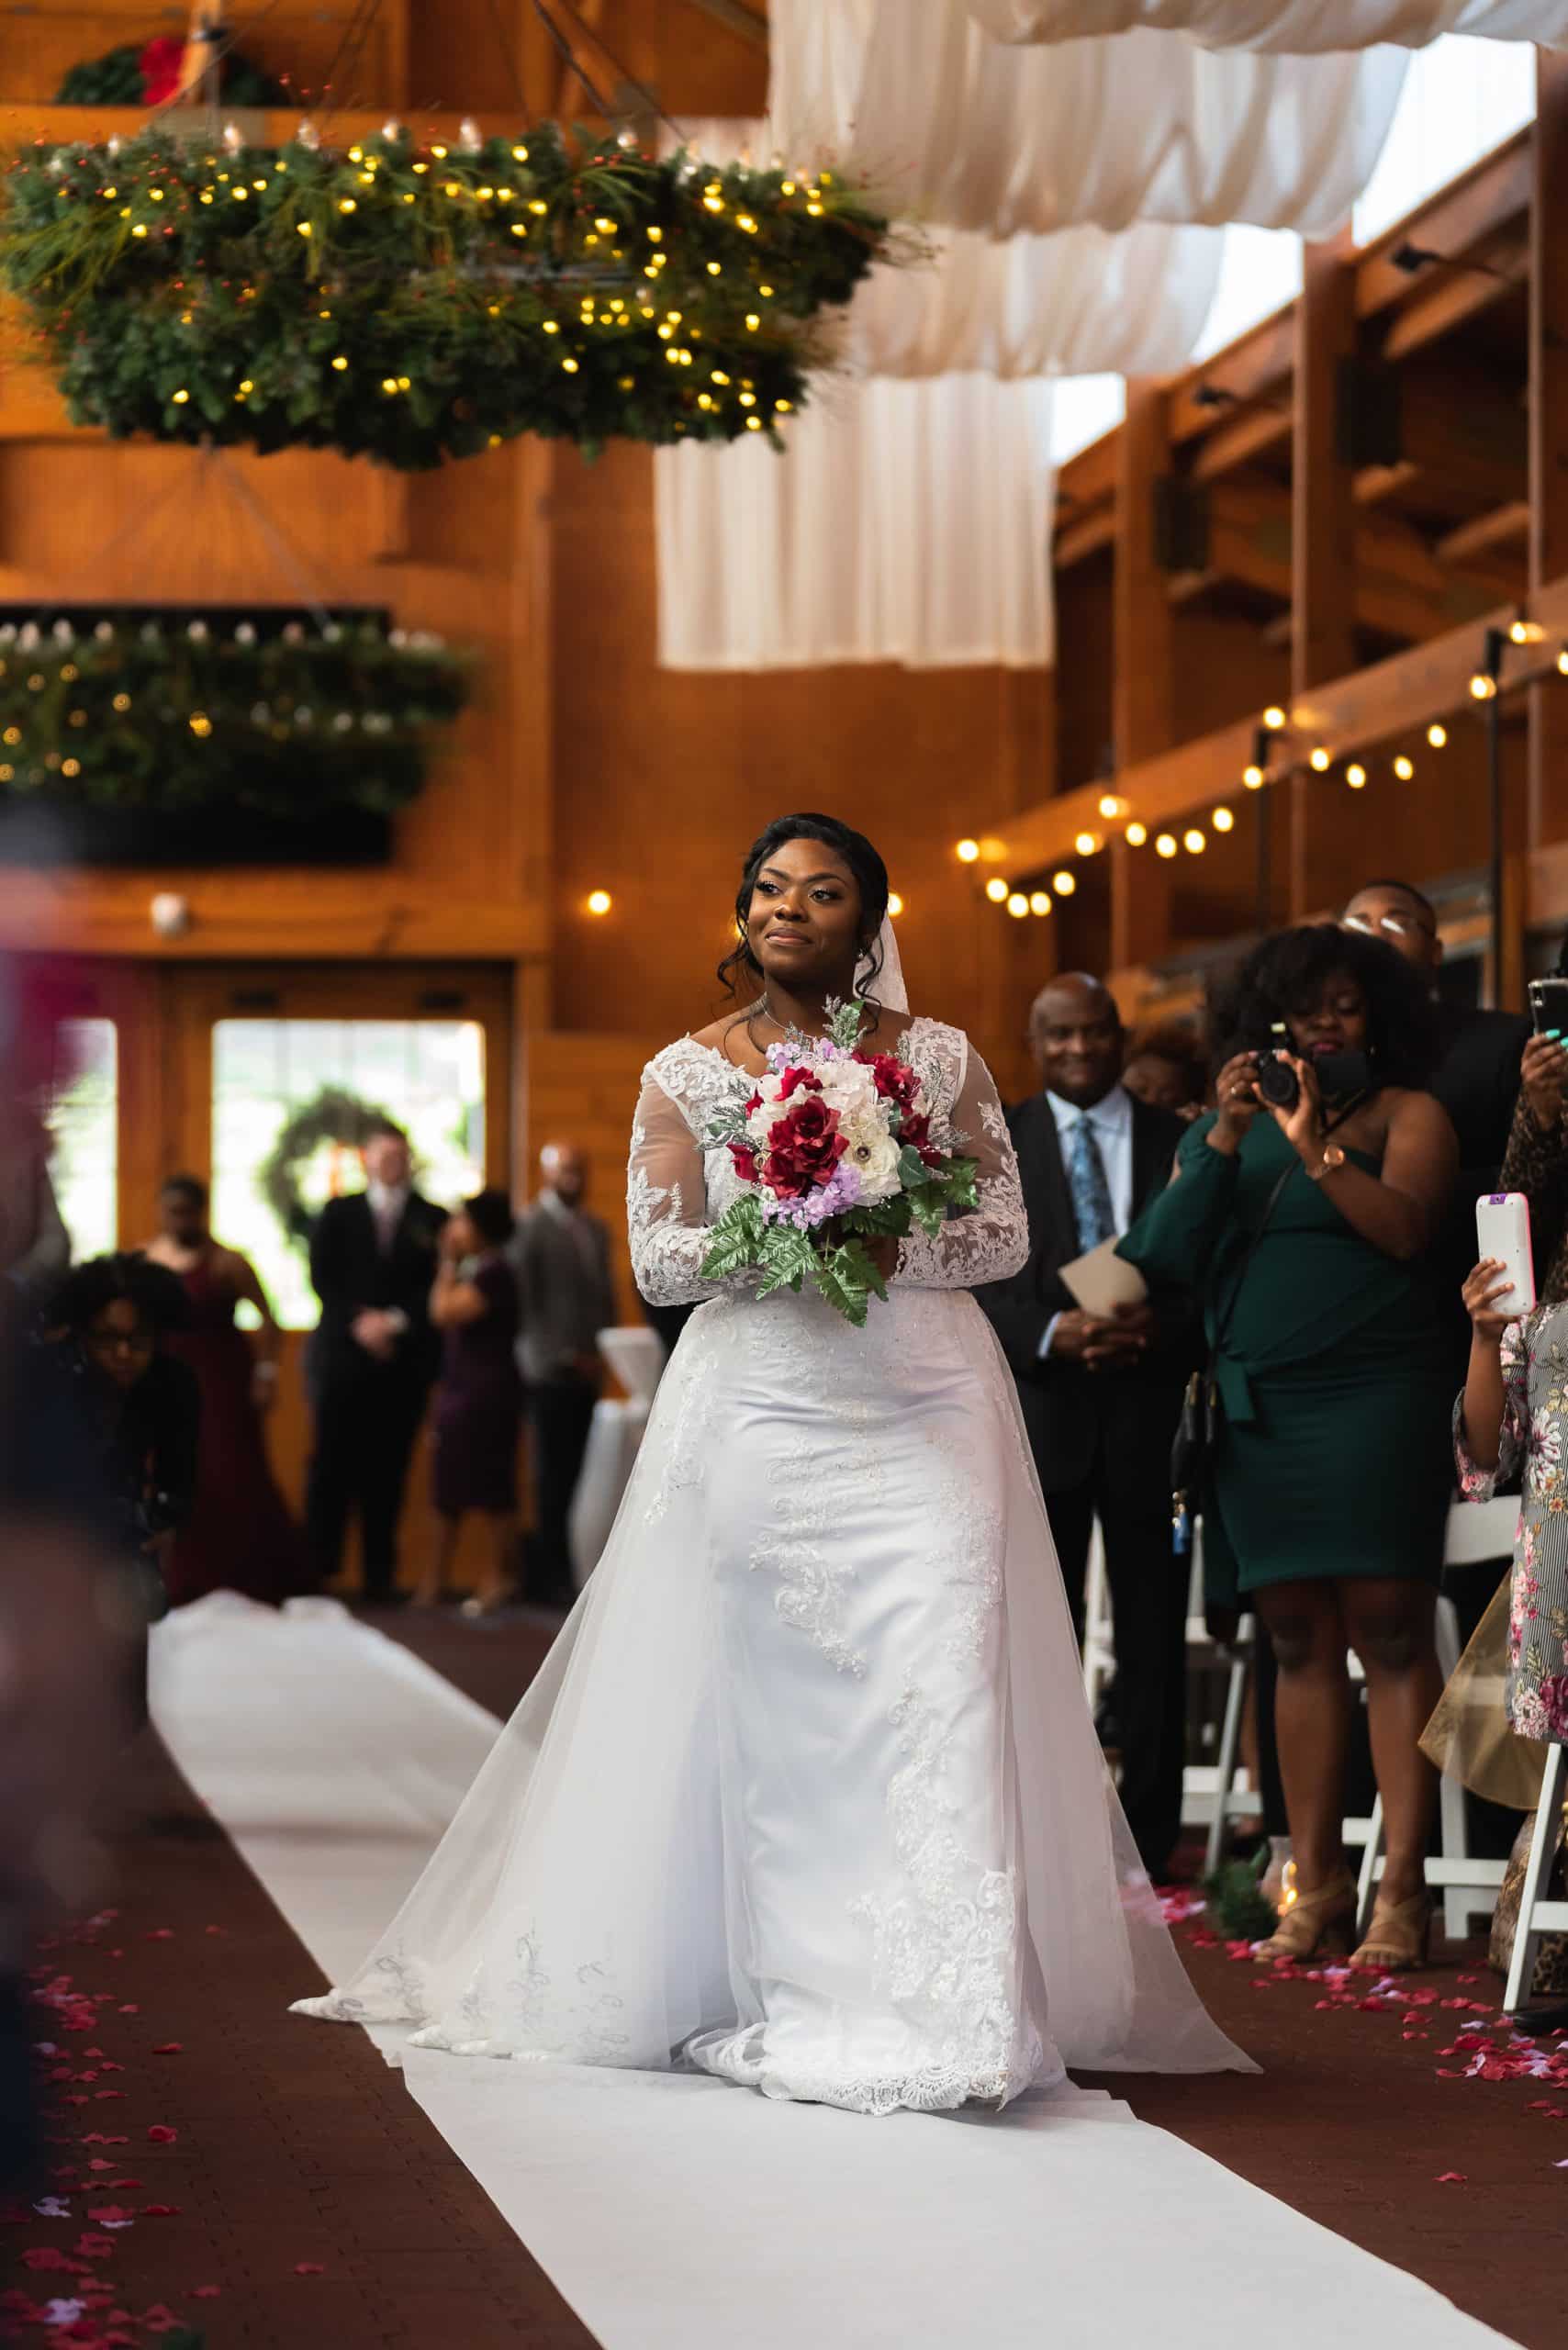 Bride walking down the aisle for the first time at a wedding venue in Raleigh, NC take by greenville, nc wedding photographer